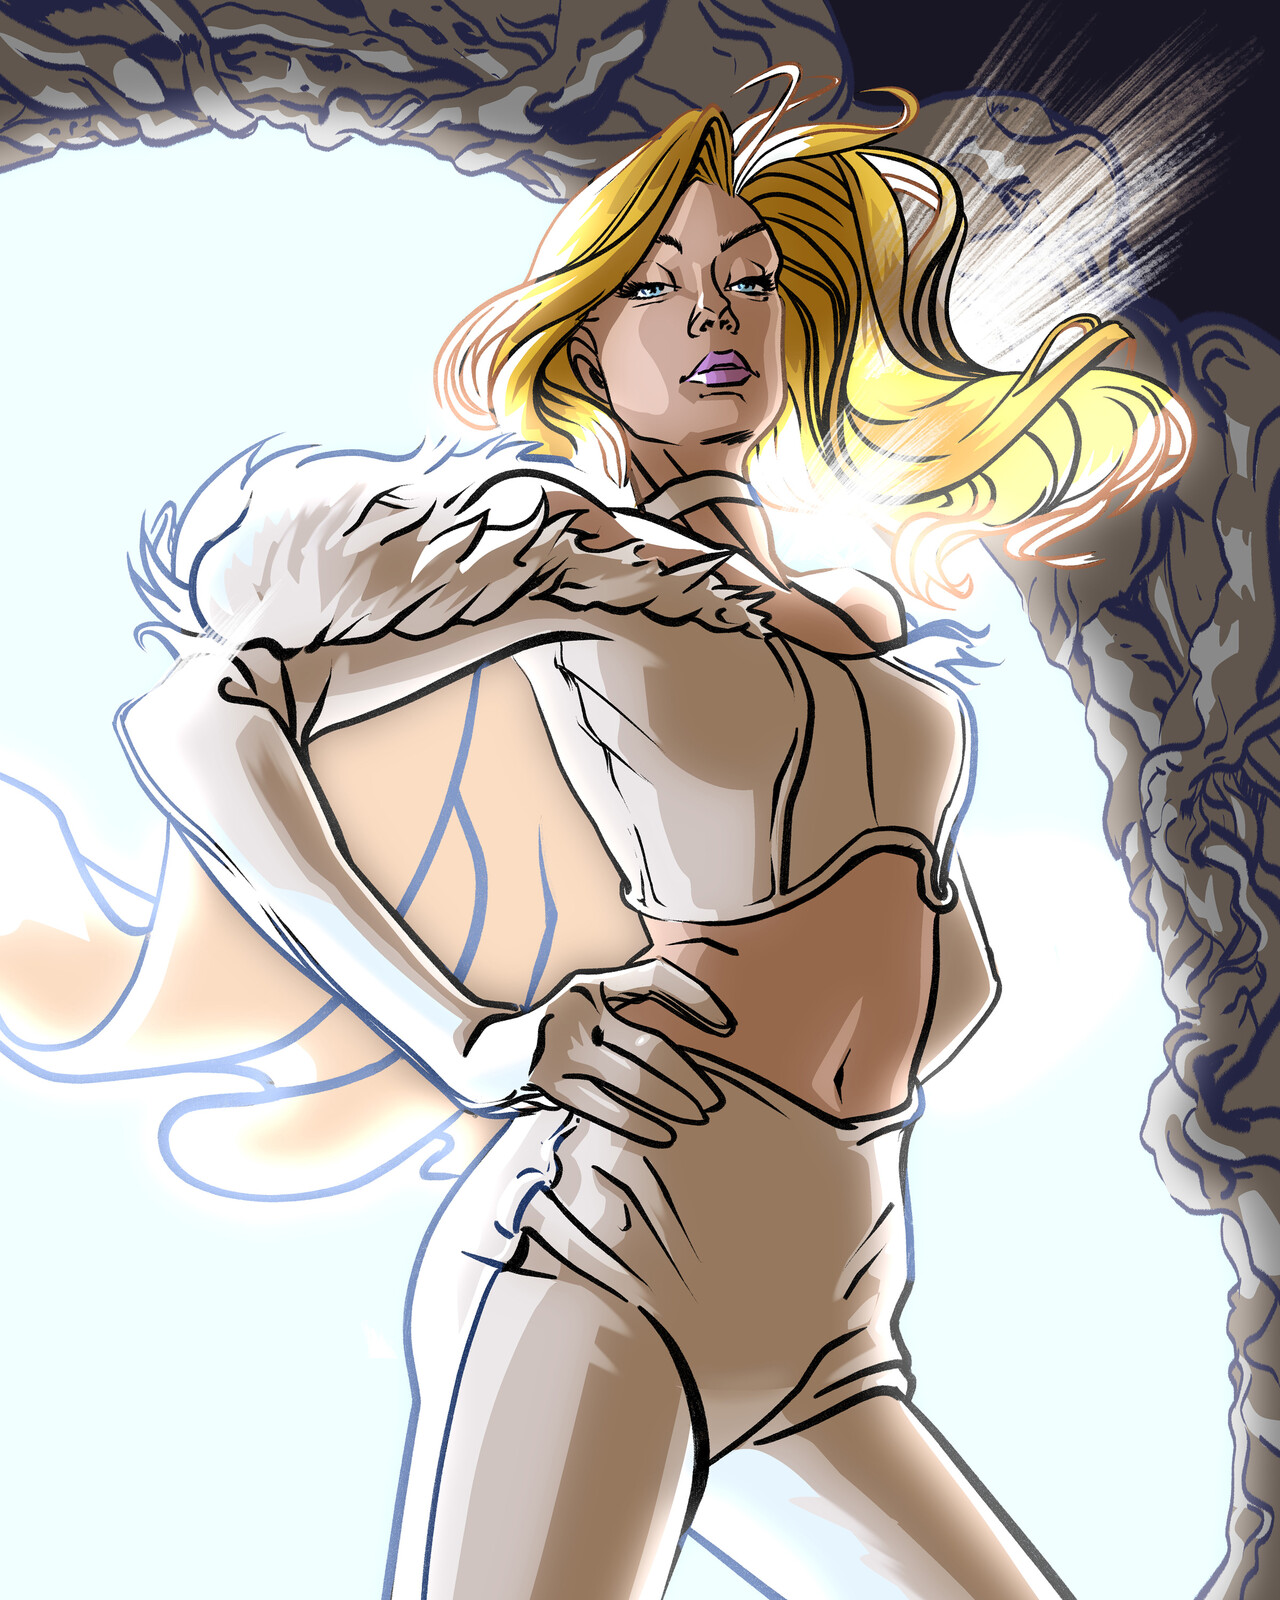 E is for Emma Frost